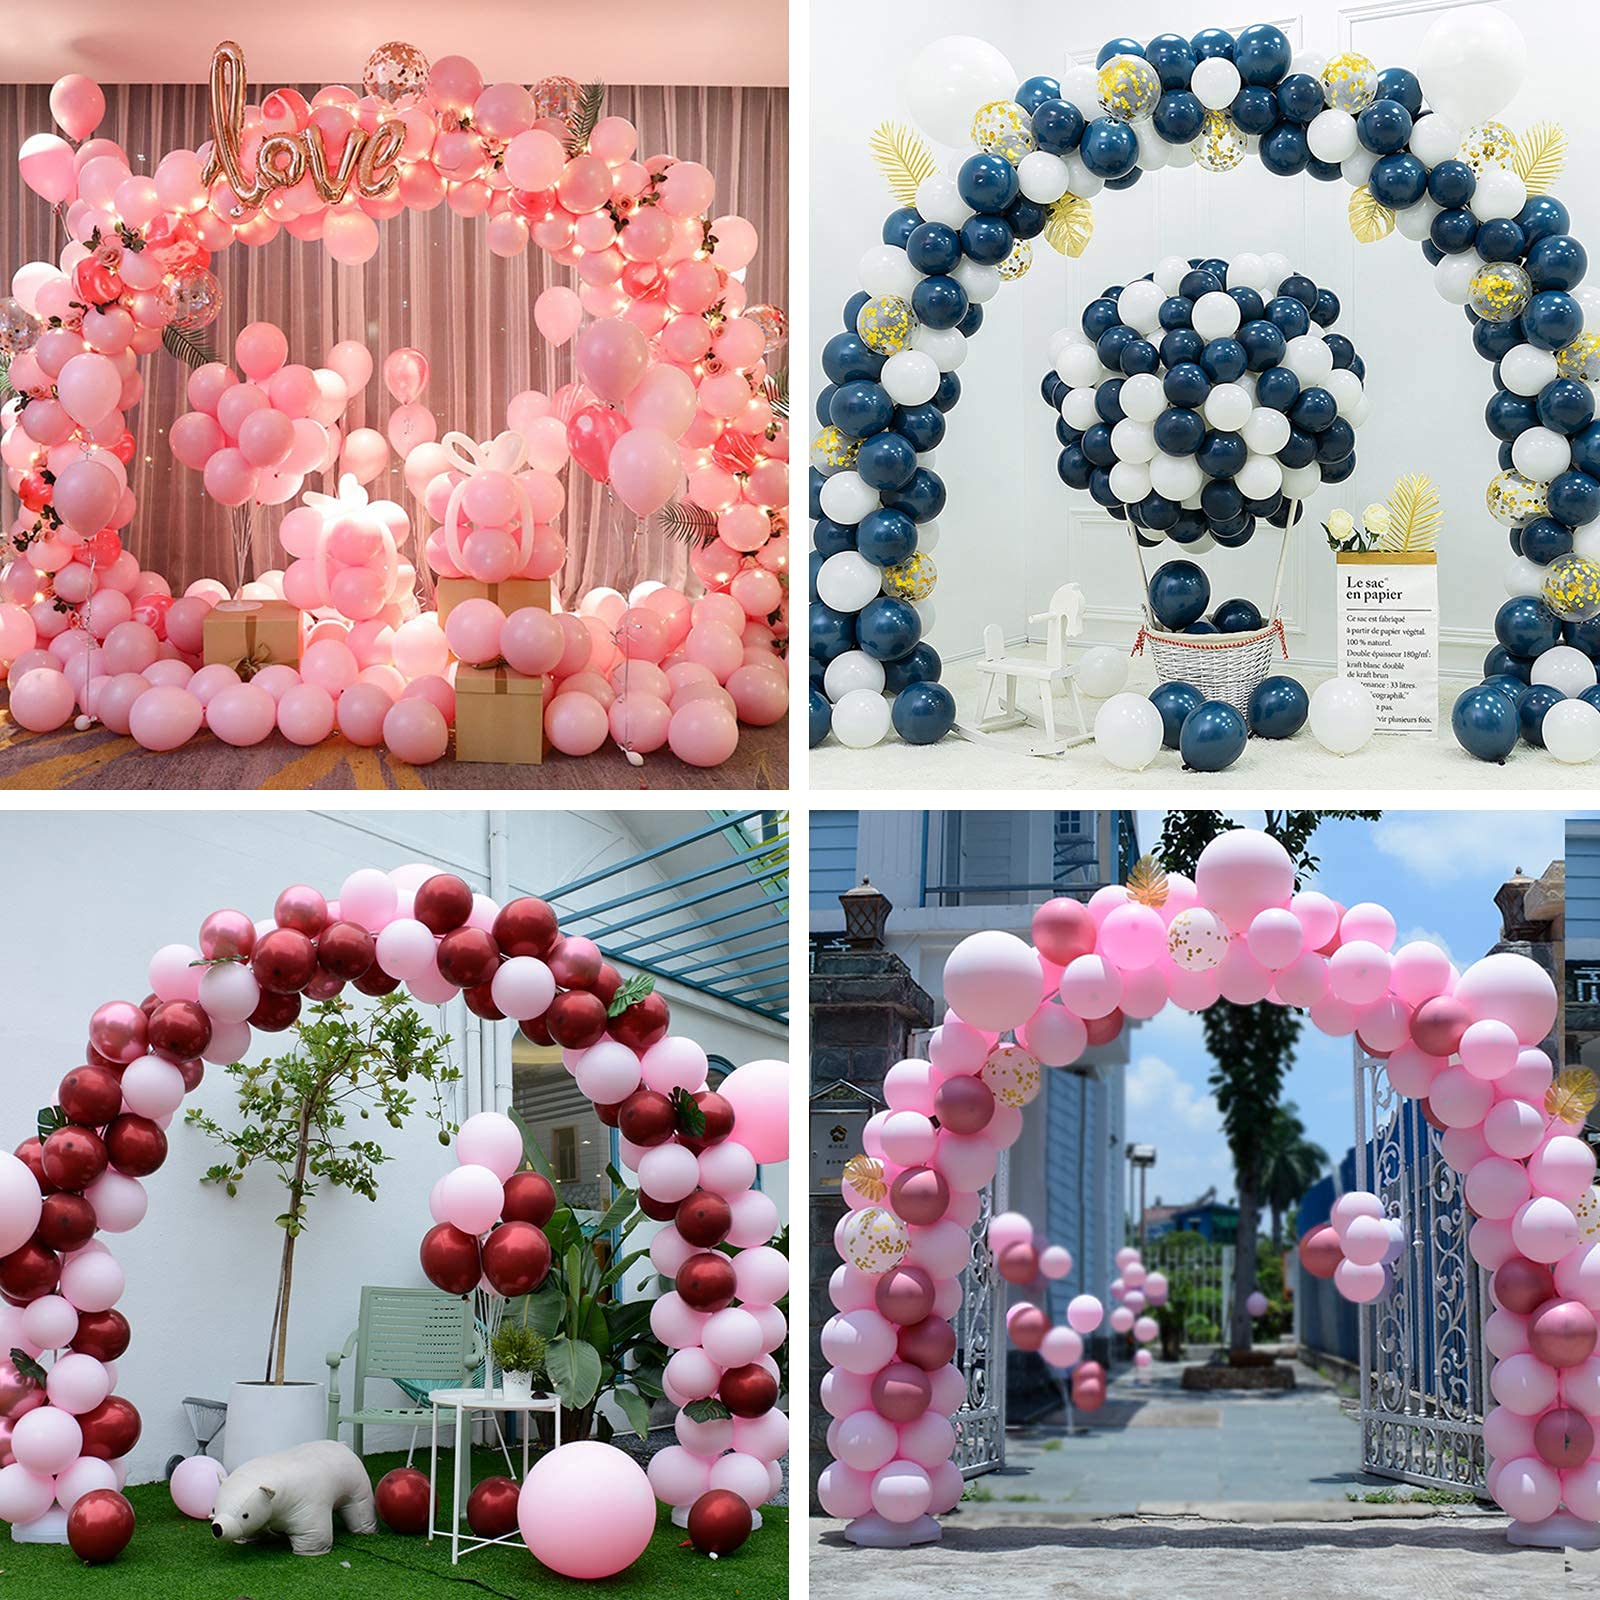 RUBFAC Balloon Arch Stand, 10ft Wide Adjustable Balloon Arch Kit with Water Fillable Base, 60pcs Balloon Clip, Balloon Strip, Tie Tool, for Wedding Birthday Party Supplies Halloween Decoration